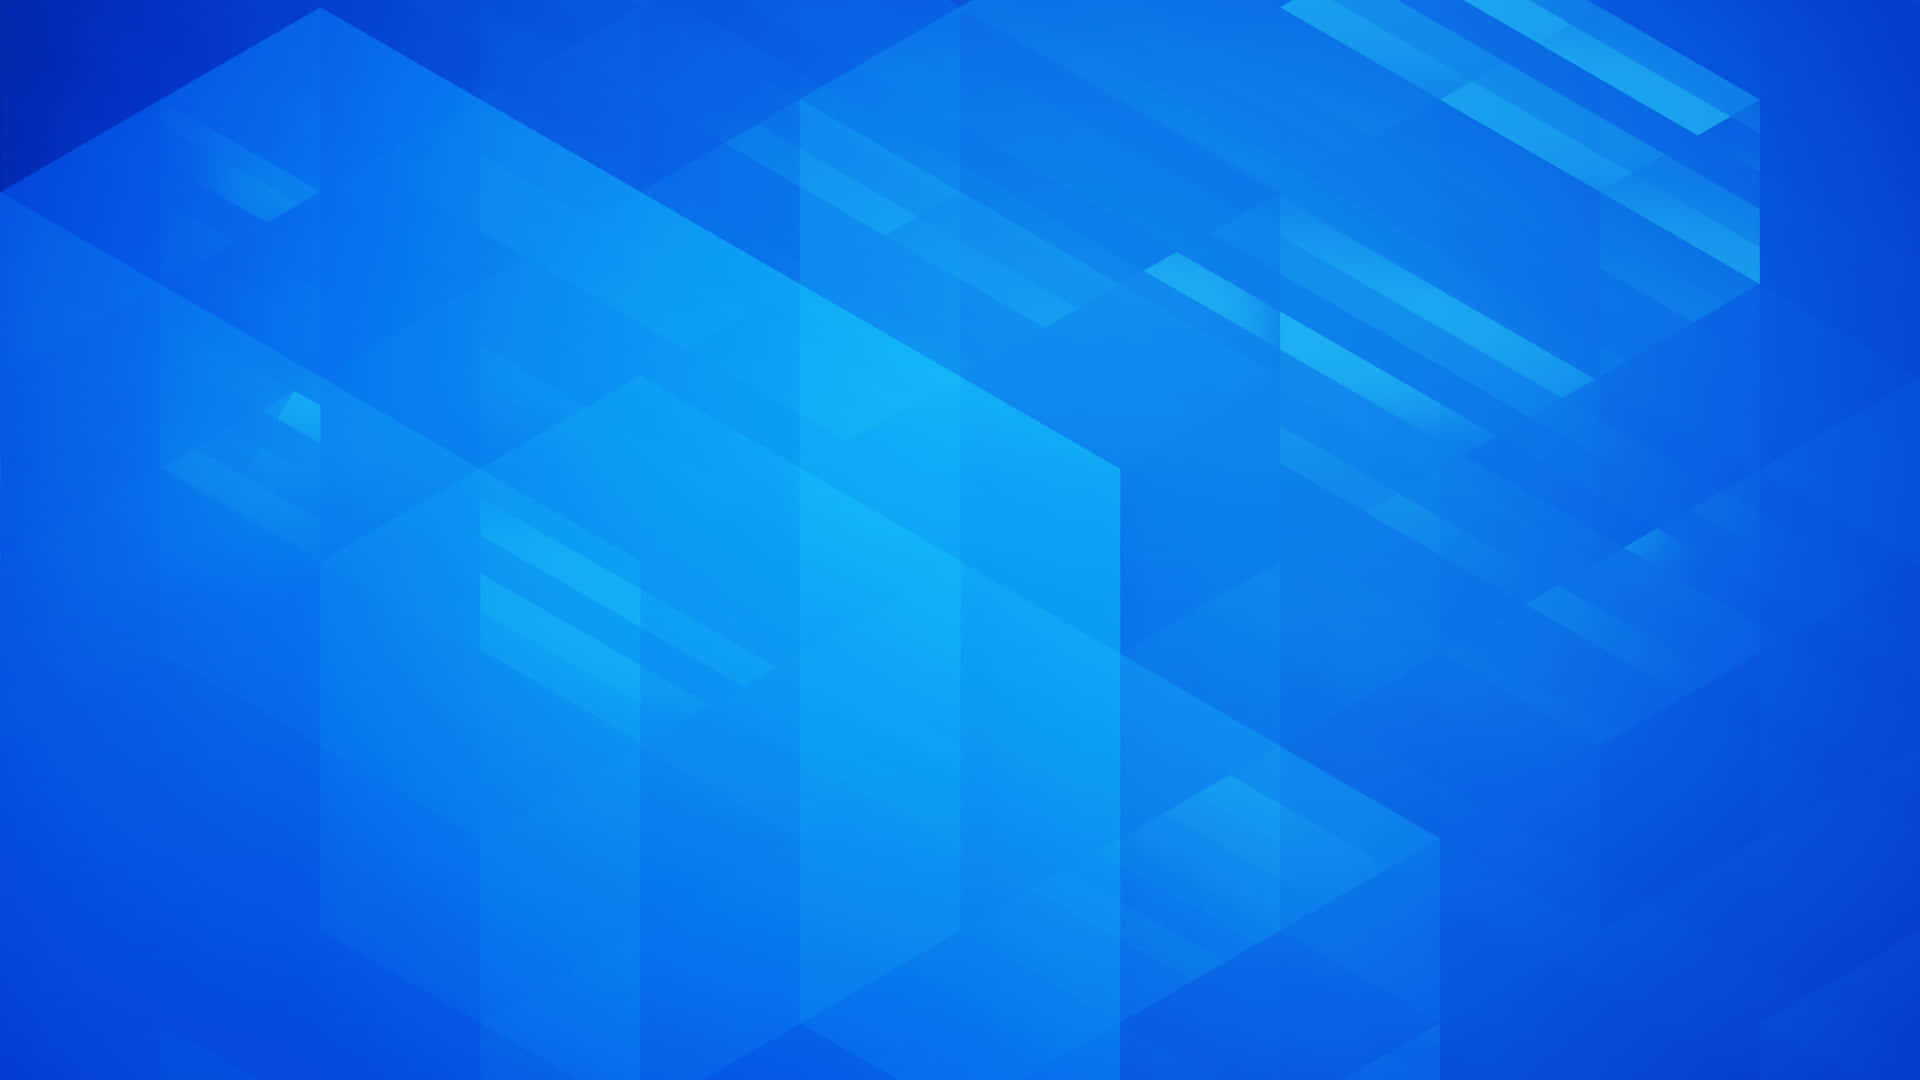 Blue Abstract Background With Geometric Shapes